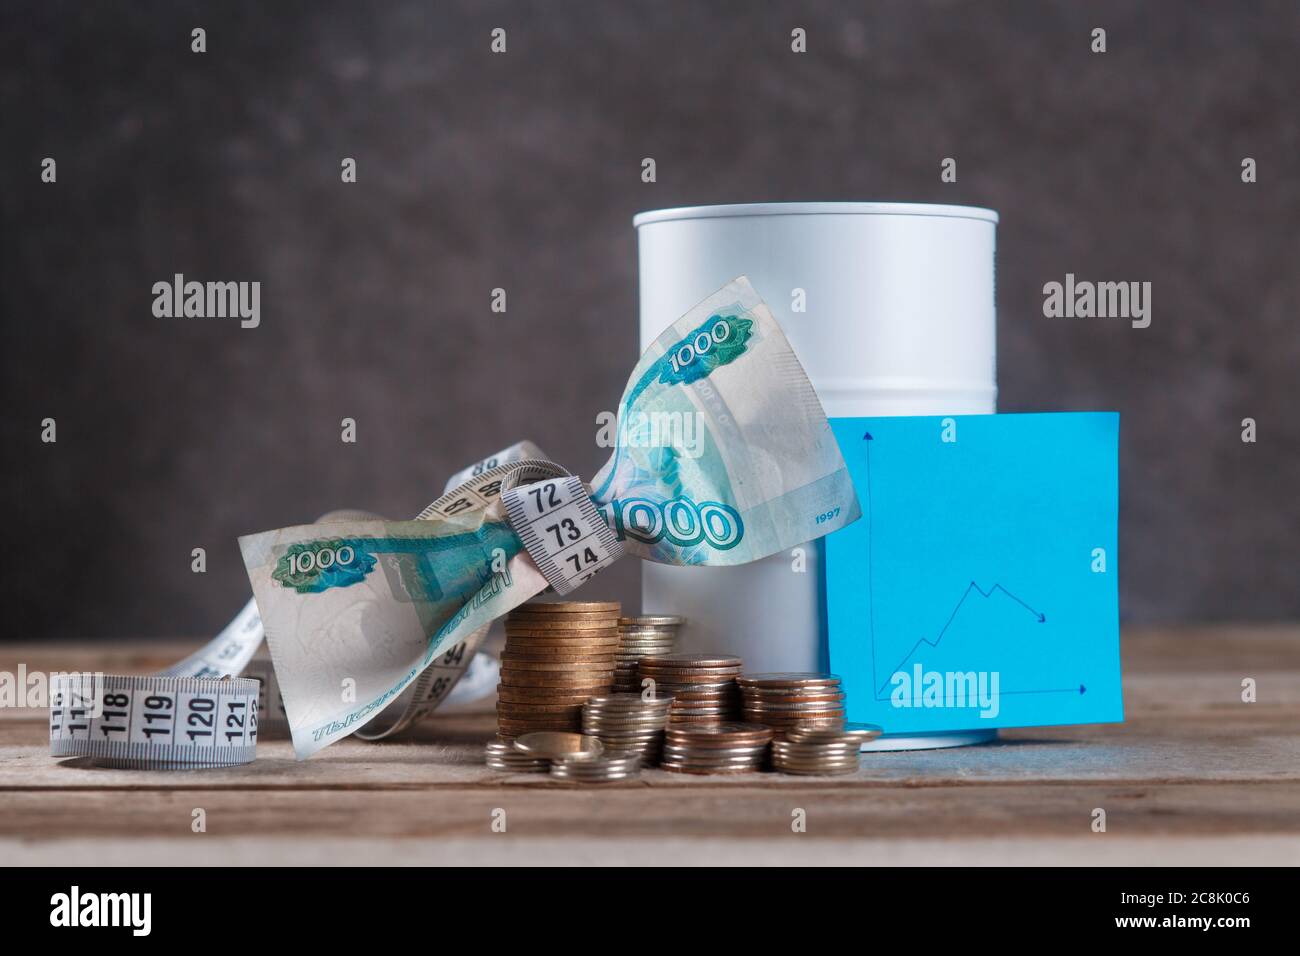 financial crisis of oil. Currency decline and deterioration in living standards Stock Photo